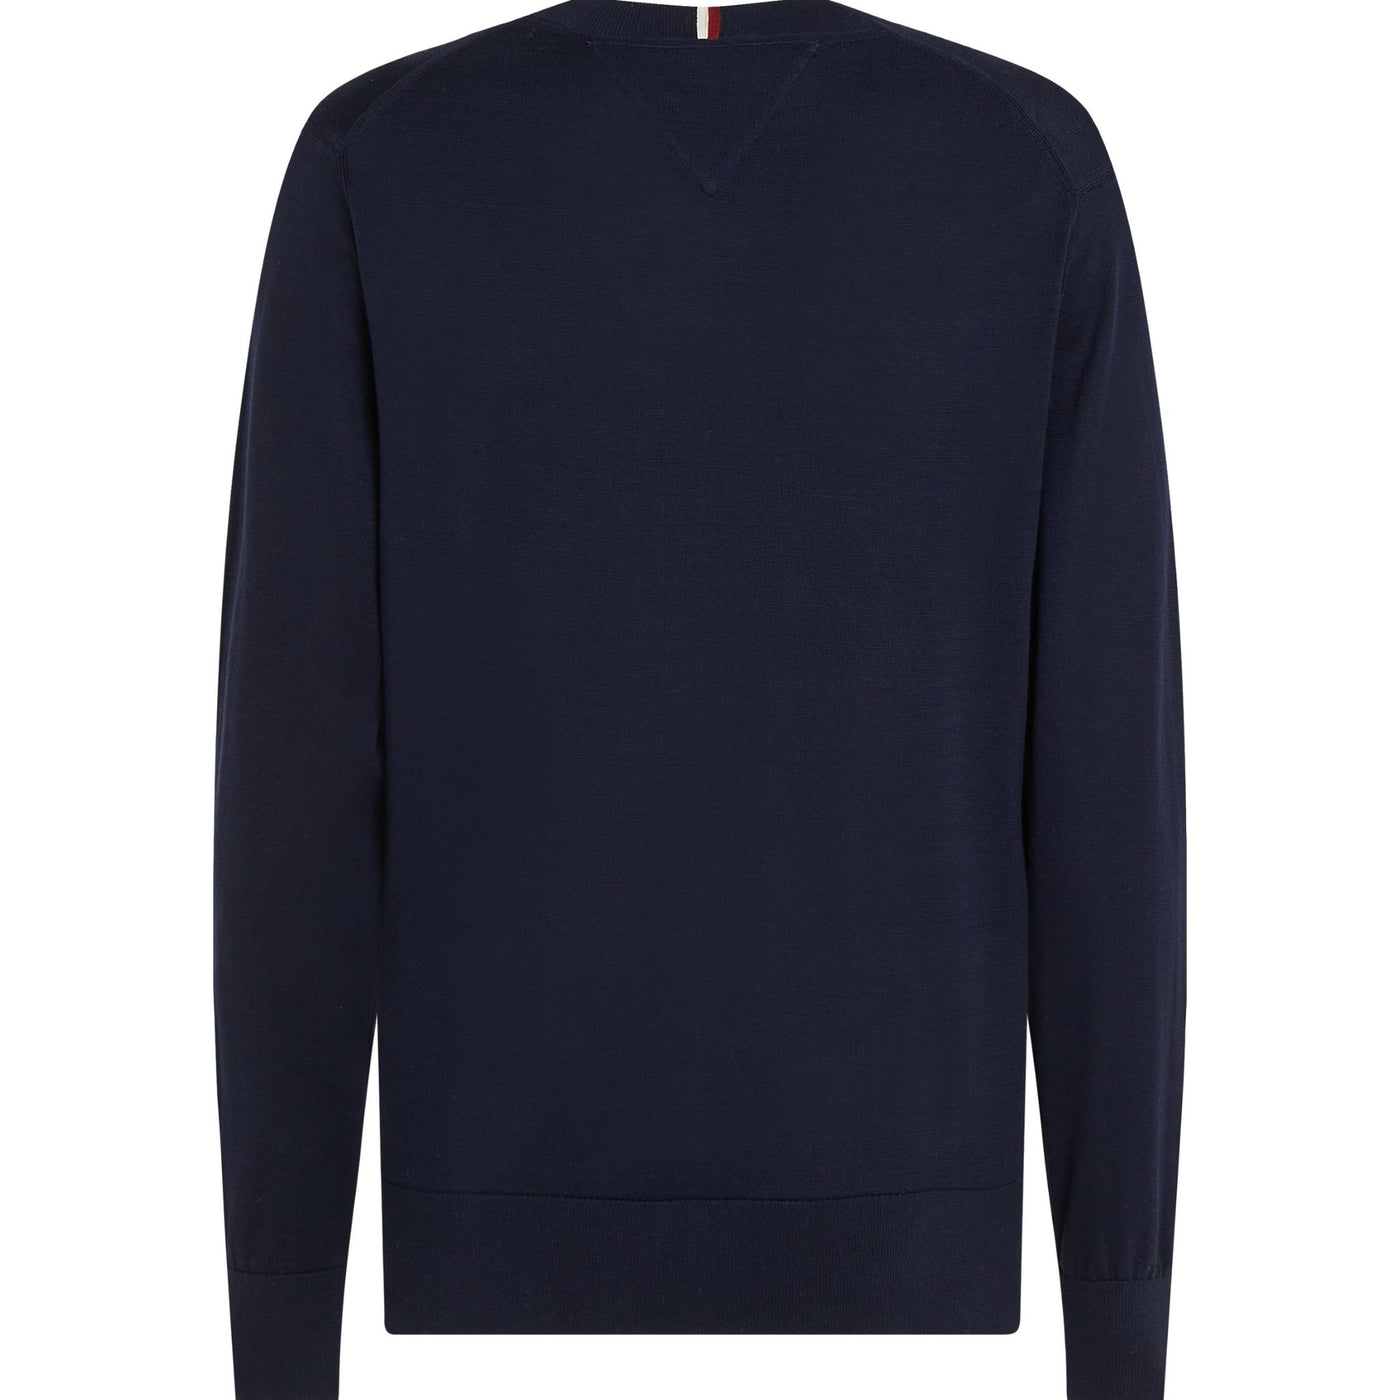 Men's sweater with ribbed collar and cuffs